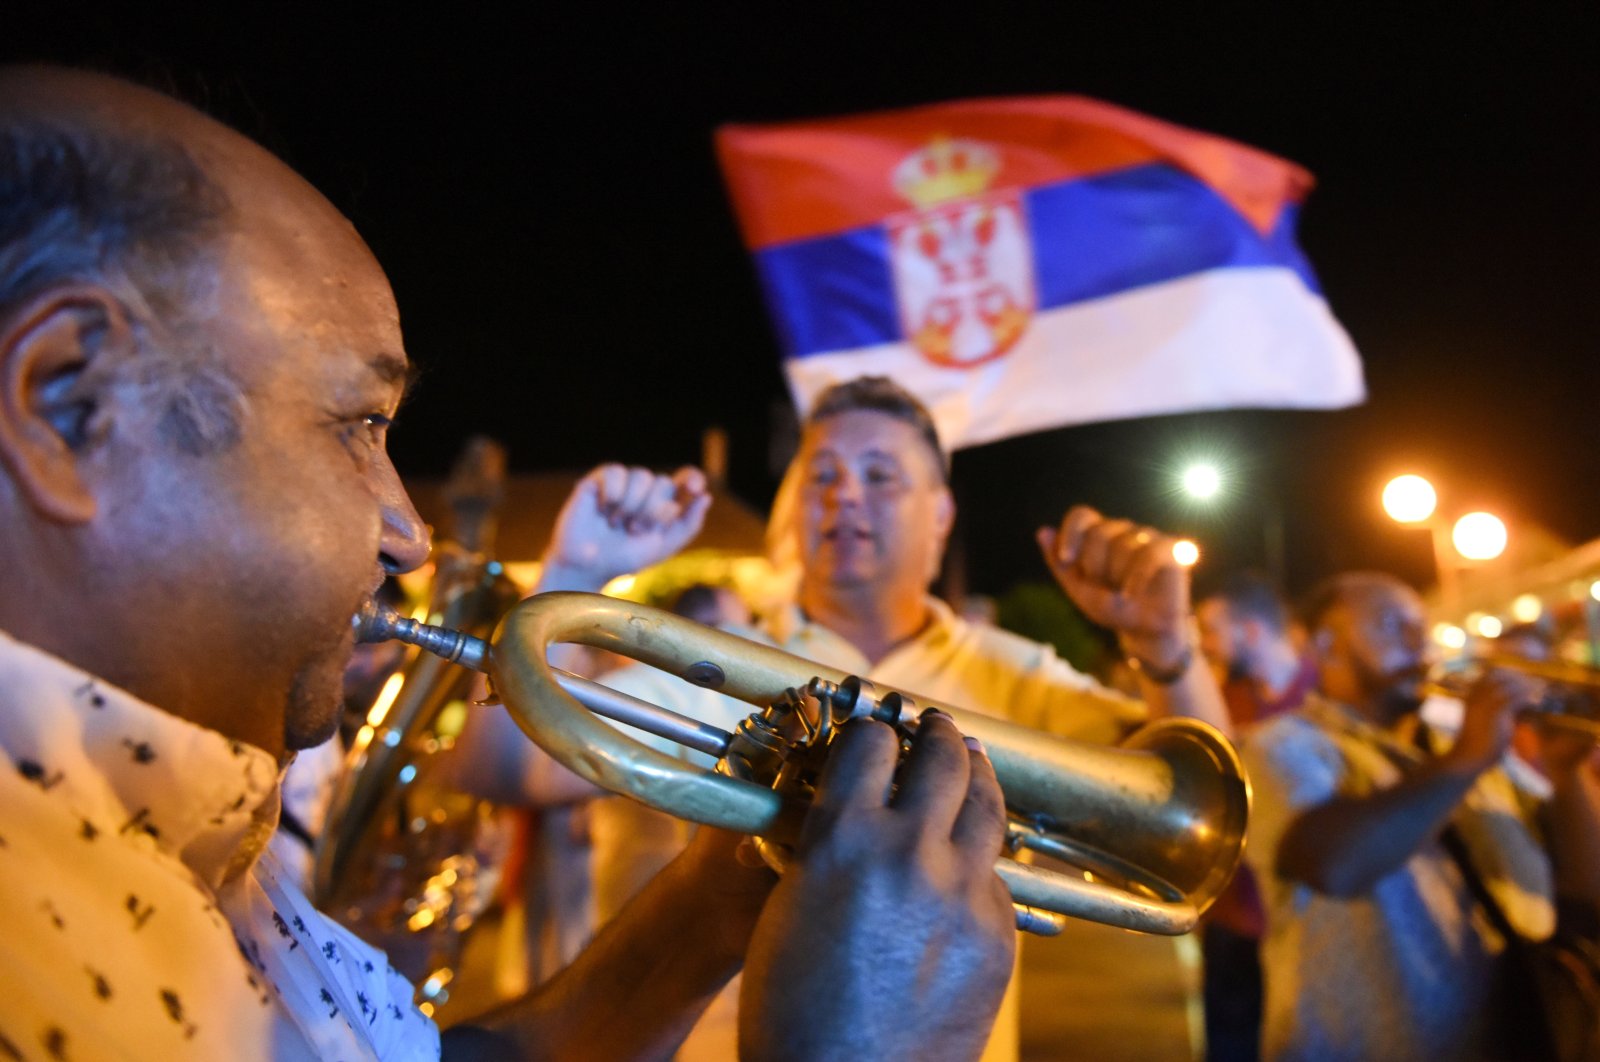 People sing and dance on a street during the annual brass band festival, in Guca, Serbia, Aug. 13, 2021. (Reuters Photo)